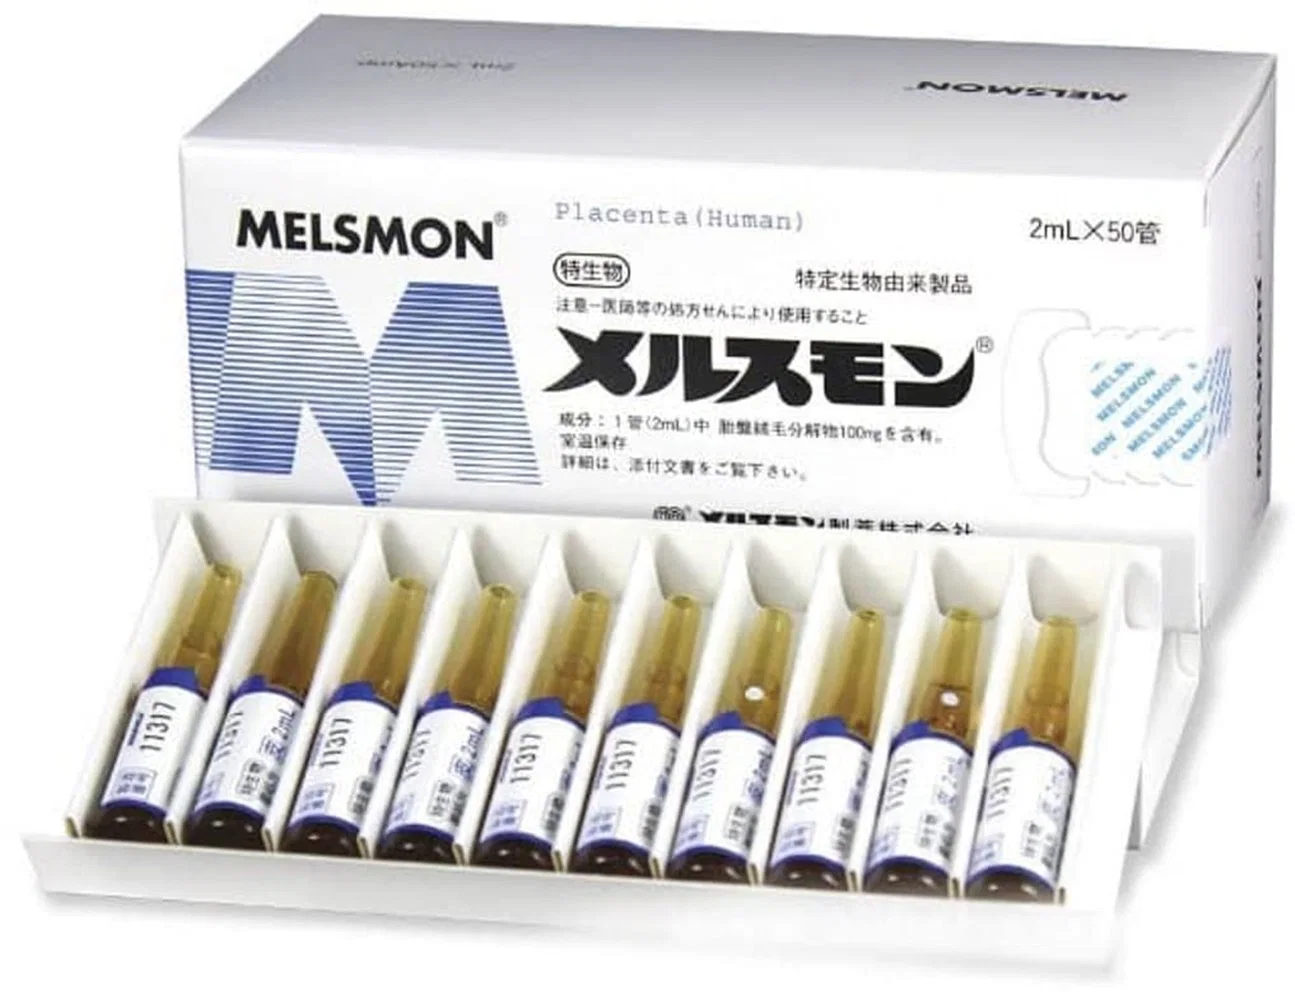 Melsmon Human Placenta Polypeptide Injection Melsmon Placenta Hormone Human Placenta Extract Essence for Anti Aging and Skin Rejuvenation